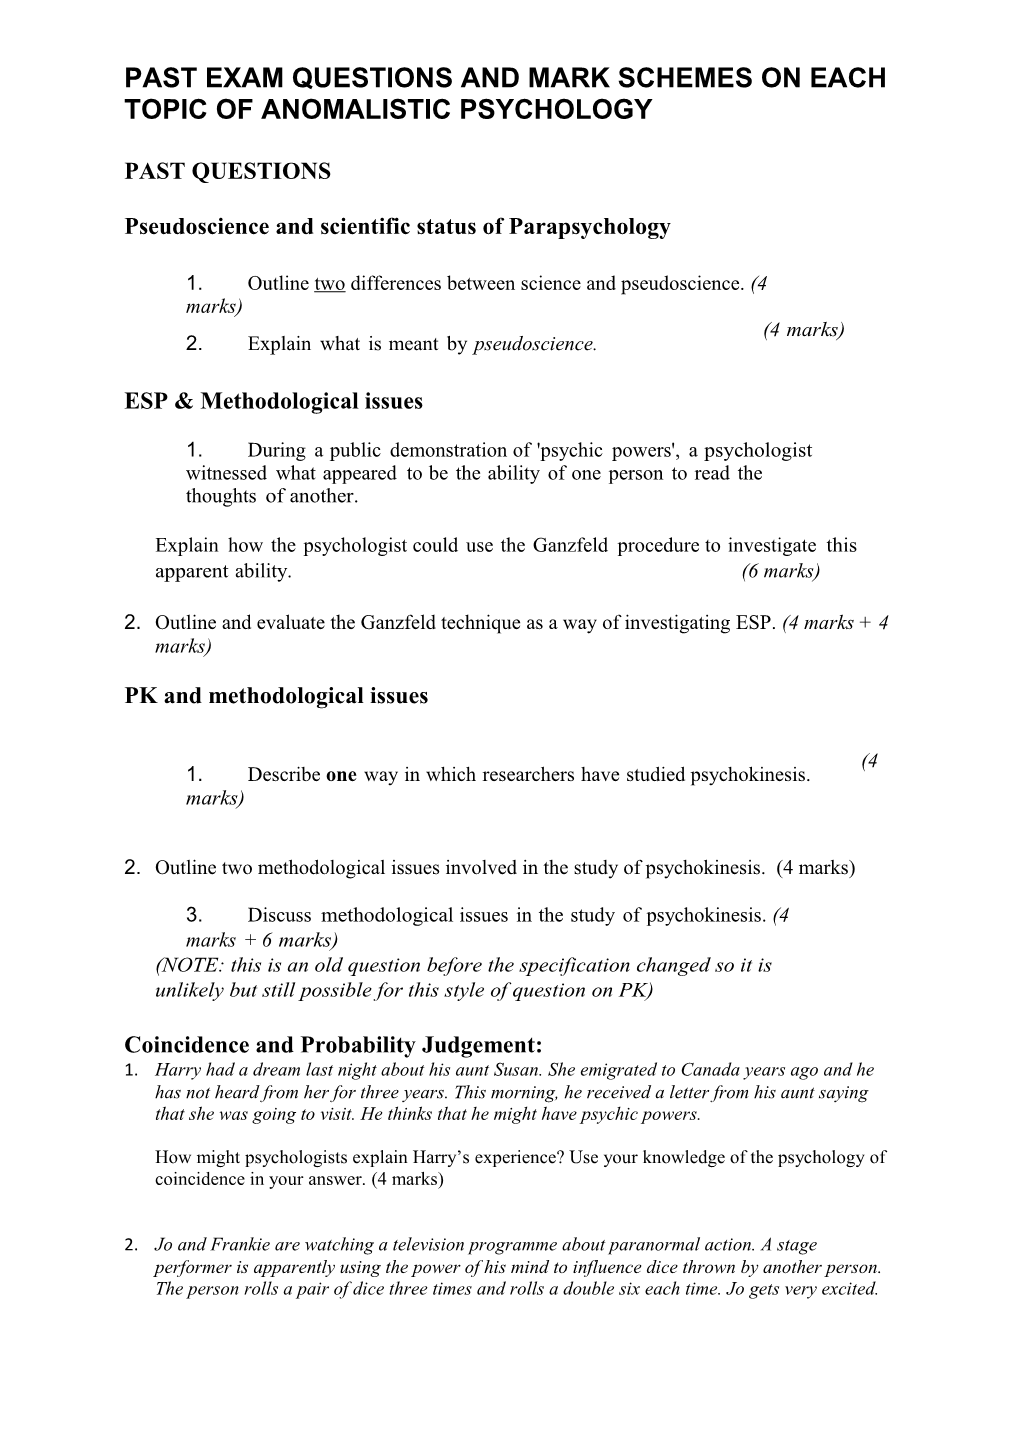 Past Exam Questions and Mark Schemes on Each Topic of Anomalistic Psychology